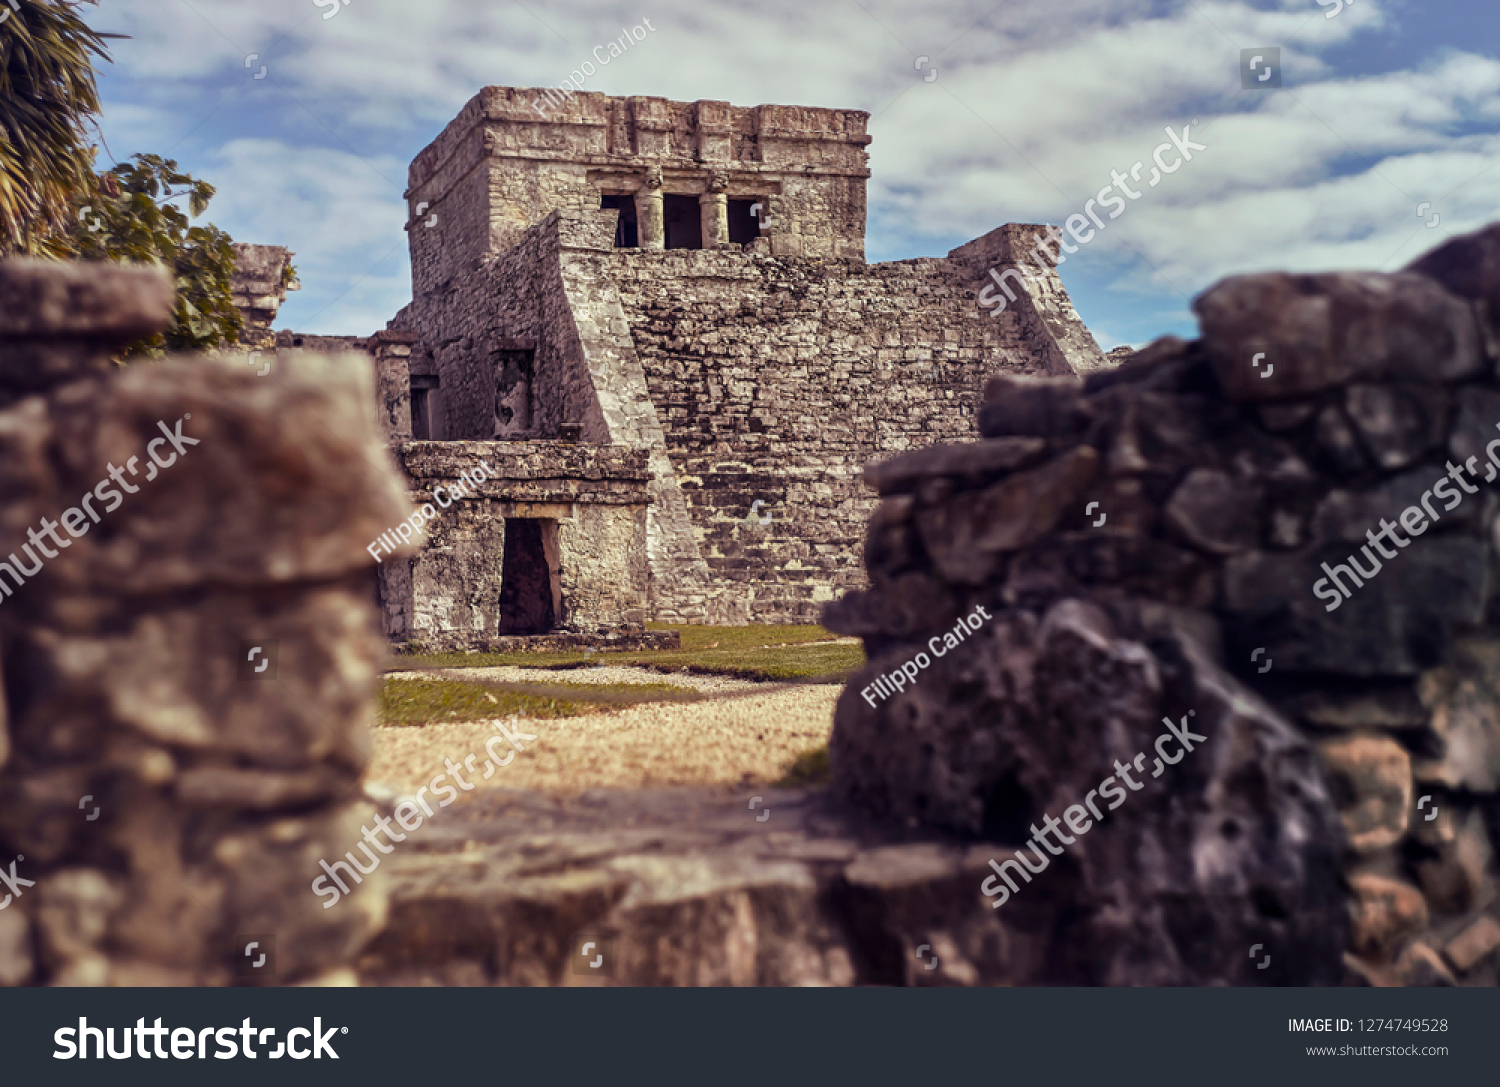 selective Temple of the frescos in the Mayan complex of Tulum, in Mexico taken during the sunset.  #1274749528